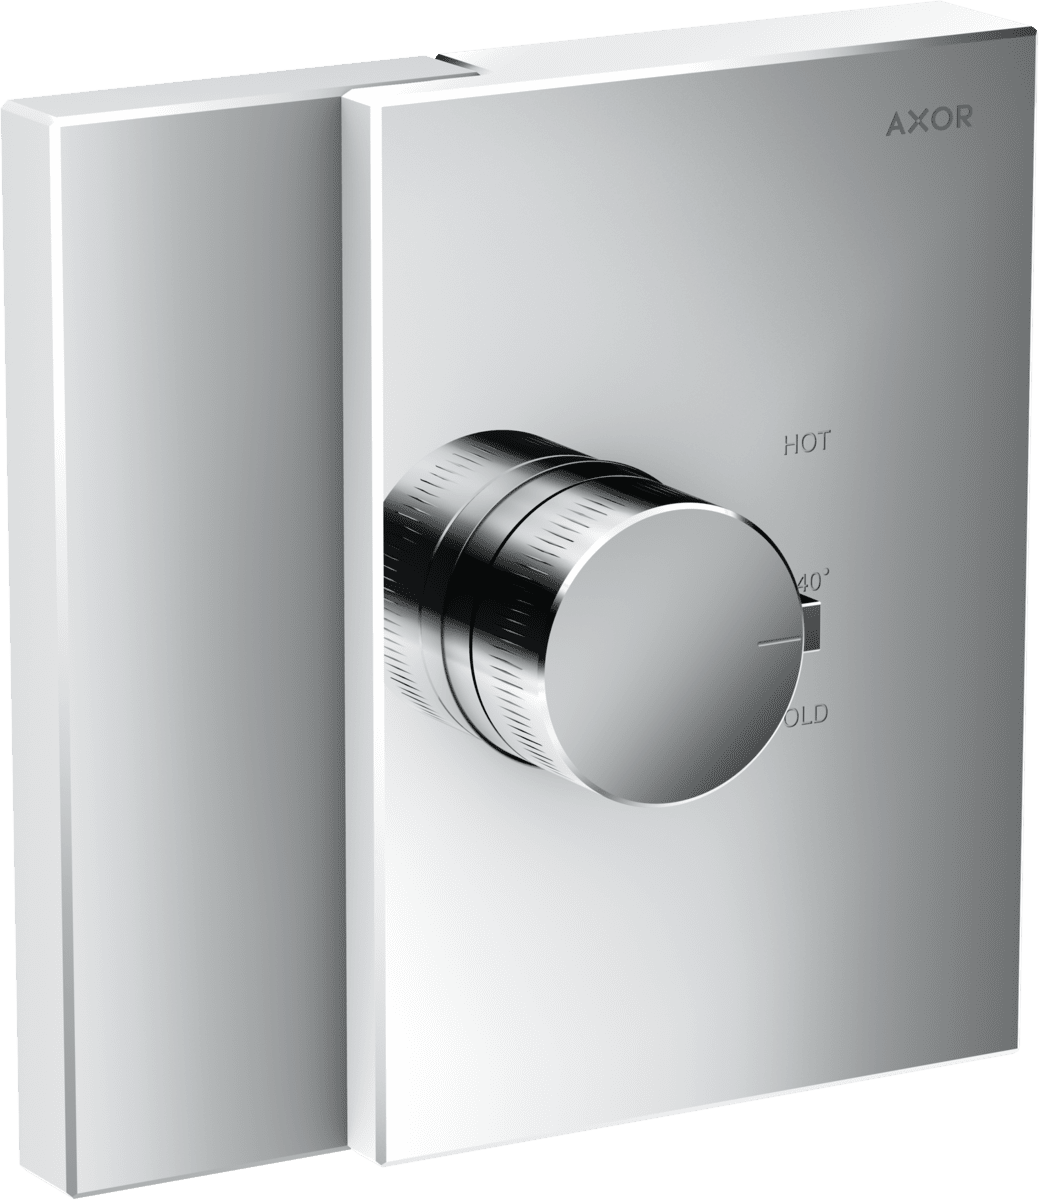 Picture of HANSGROHE AXOR Edge Thermostat HighFlow for concealed installation #46740000 - Chrome